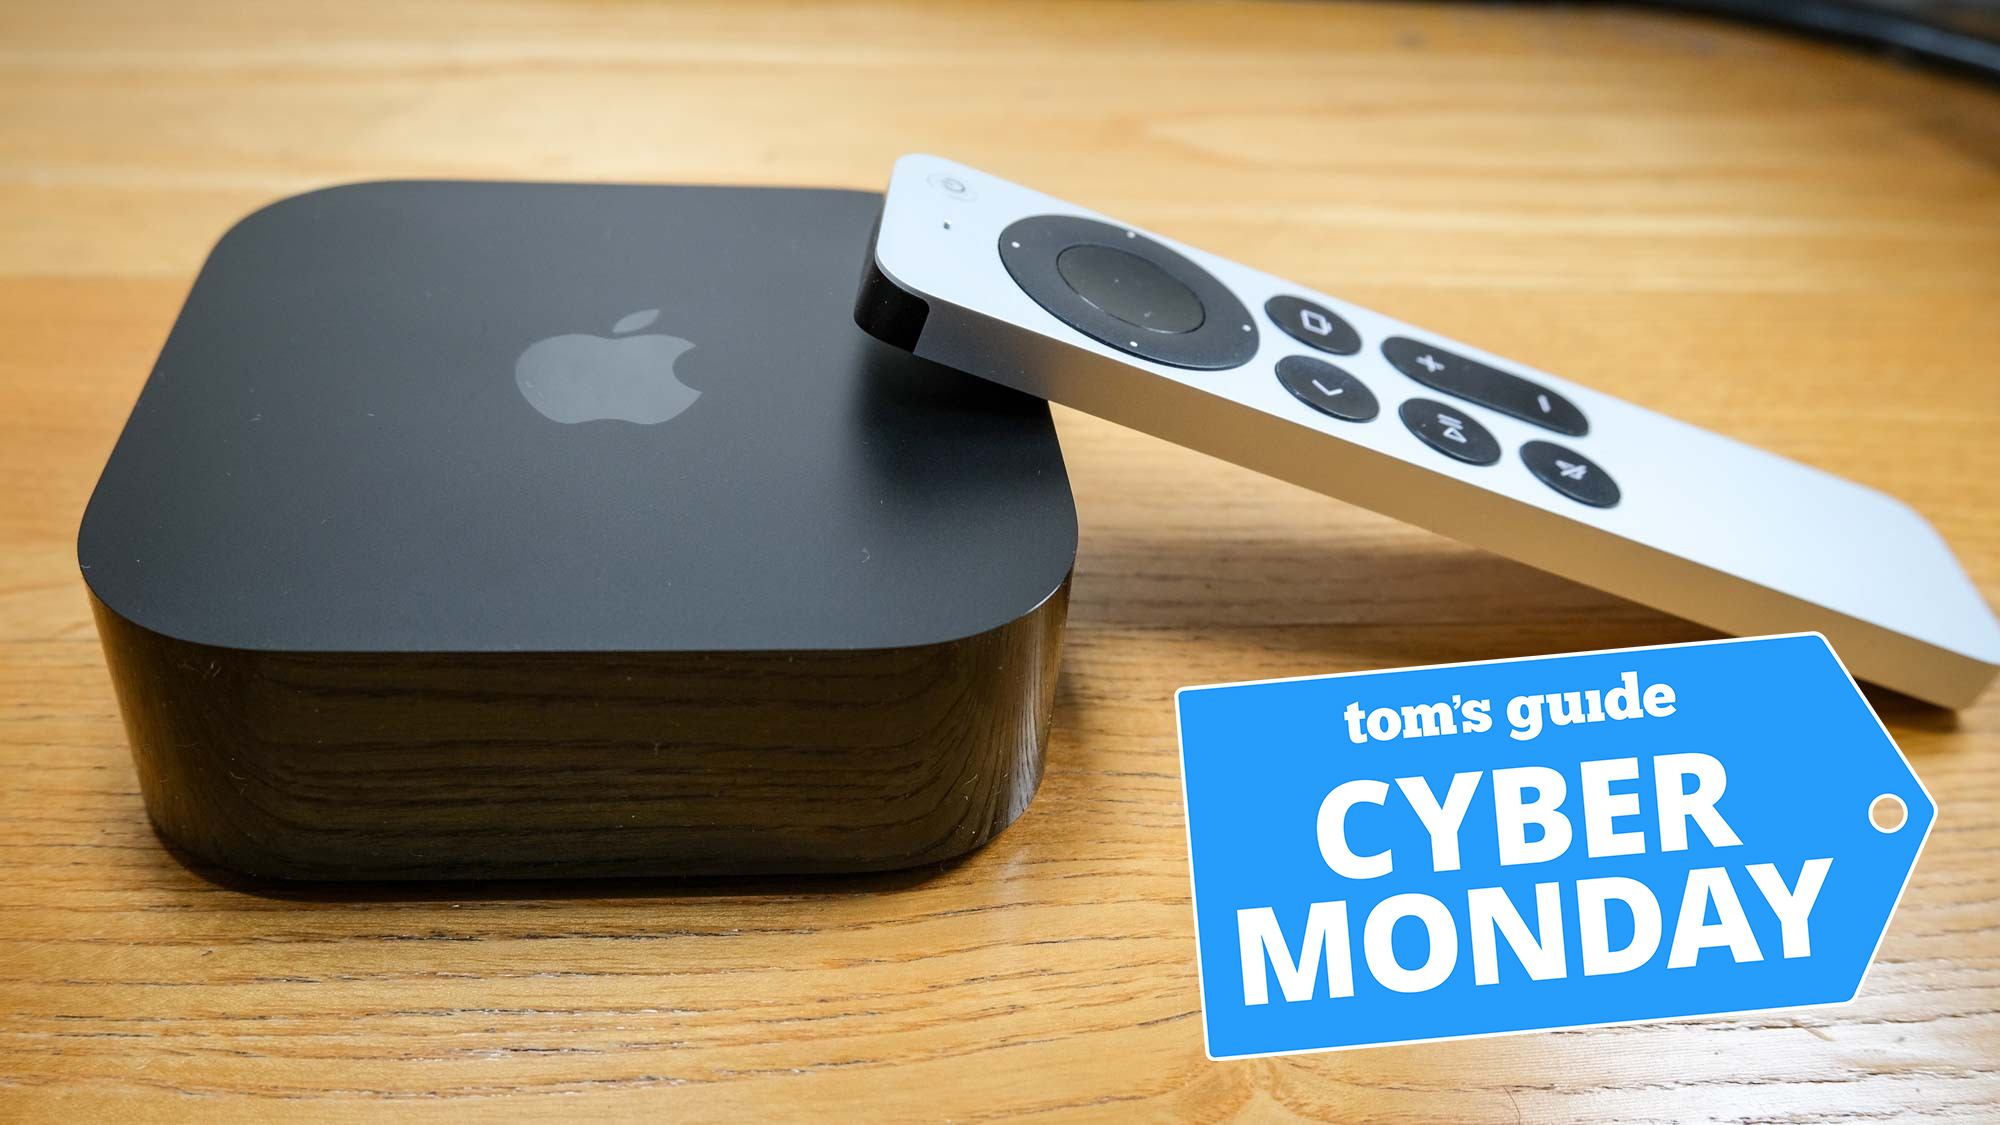 The Apple TV 4K for my Monday deal | Tom's Guide